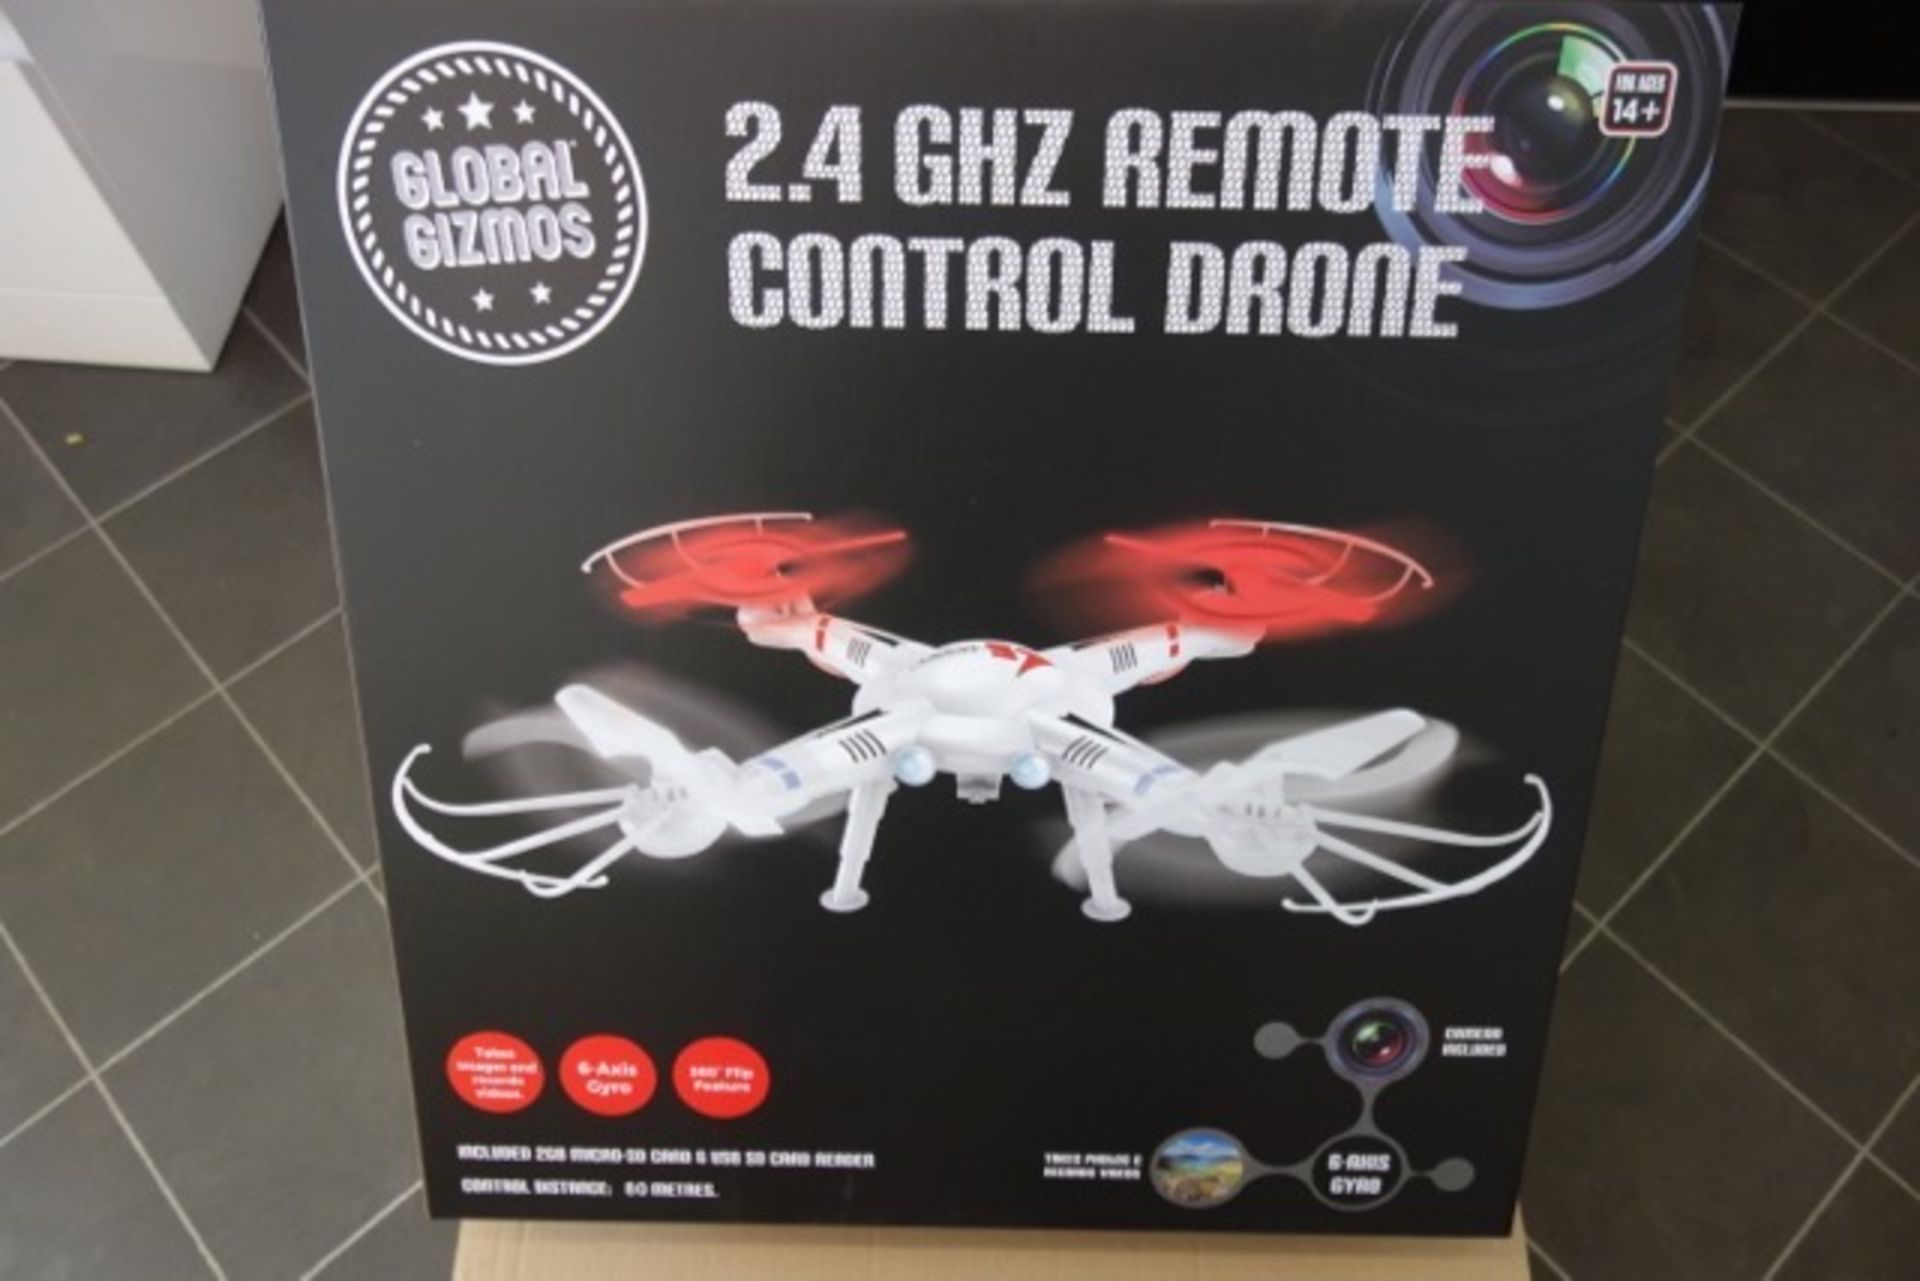 1 x Brand New Global Gizmos 2.4GHZ Remote Control Drone. Takes images & recordes videos, 6 axis - Image 4 of 4